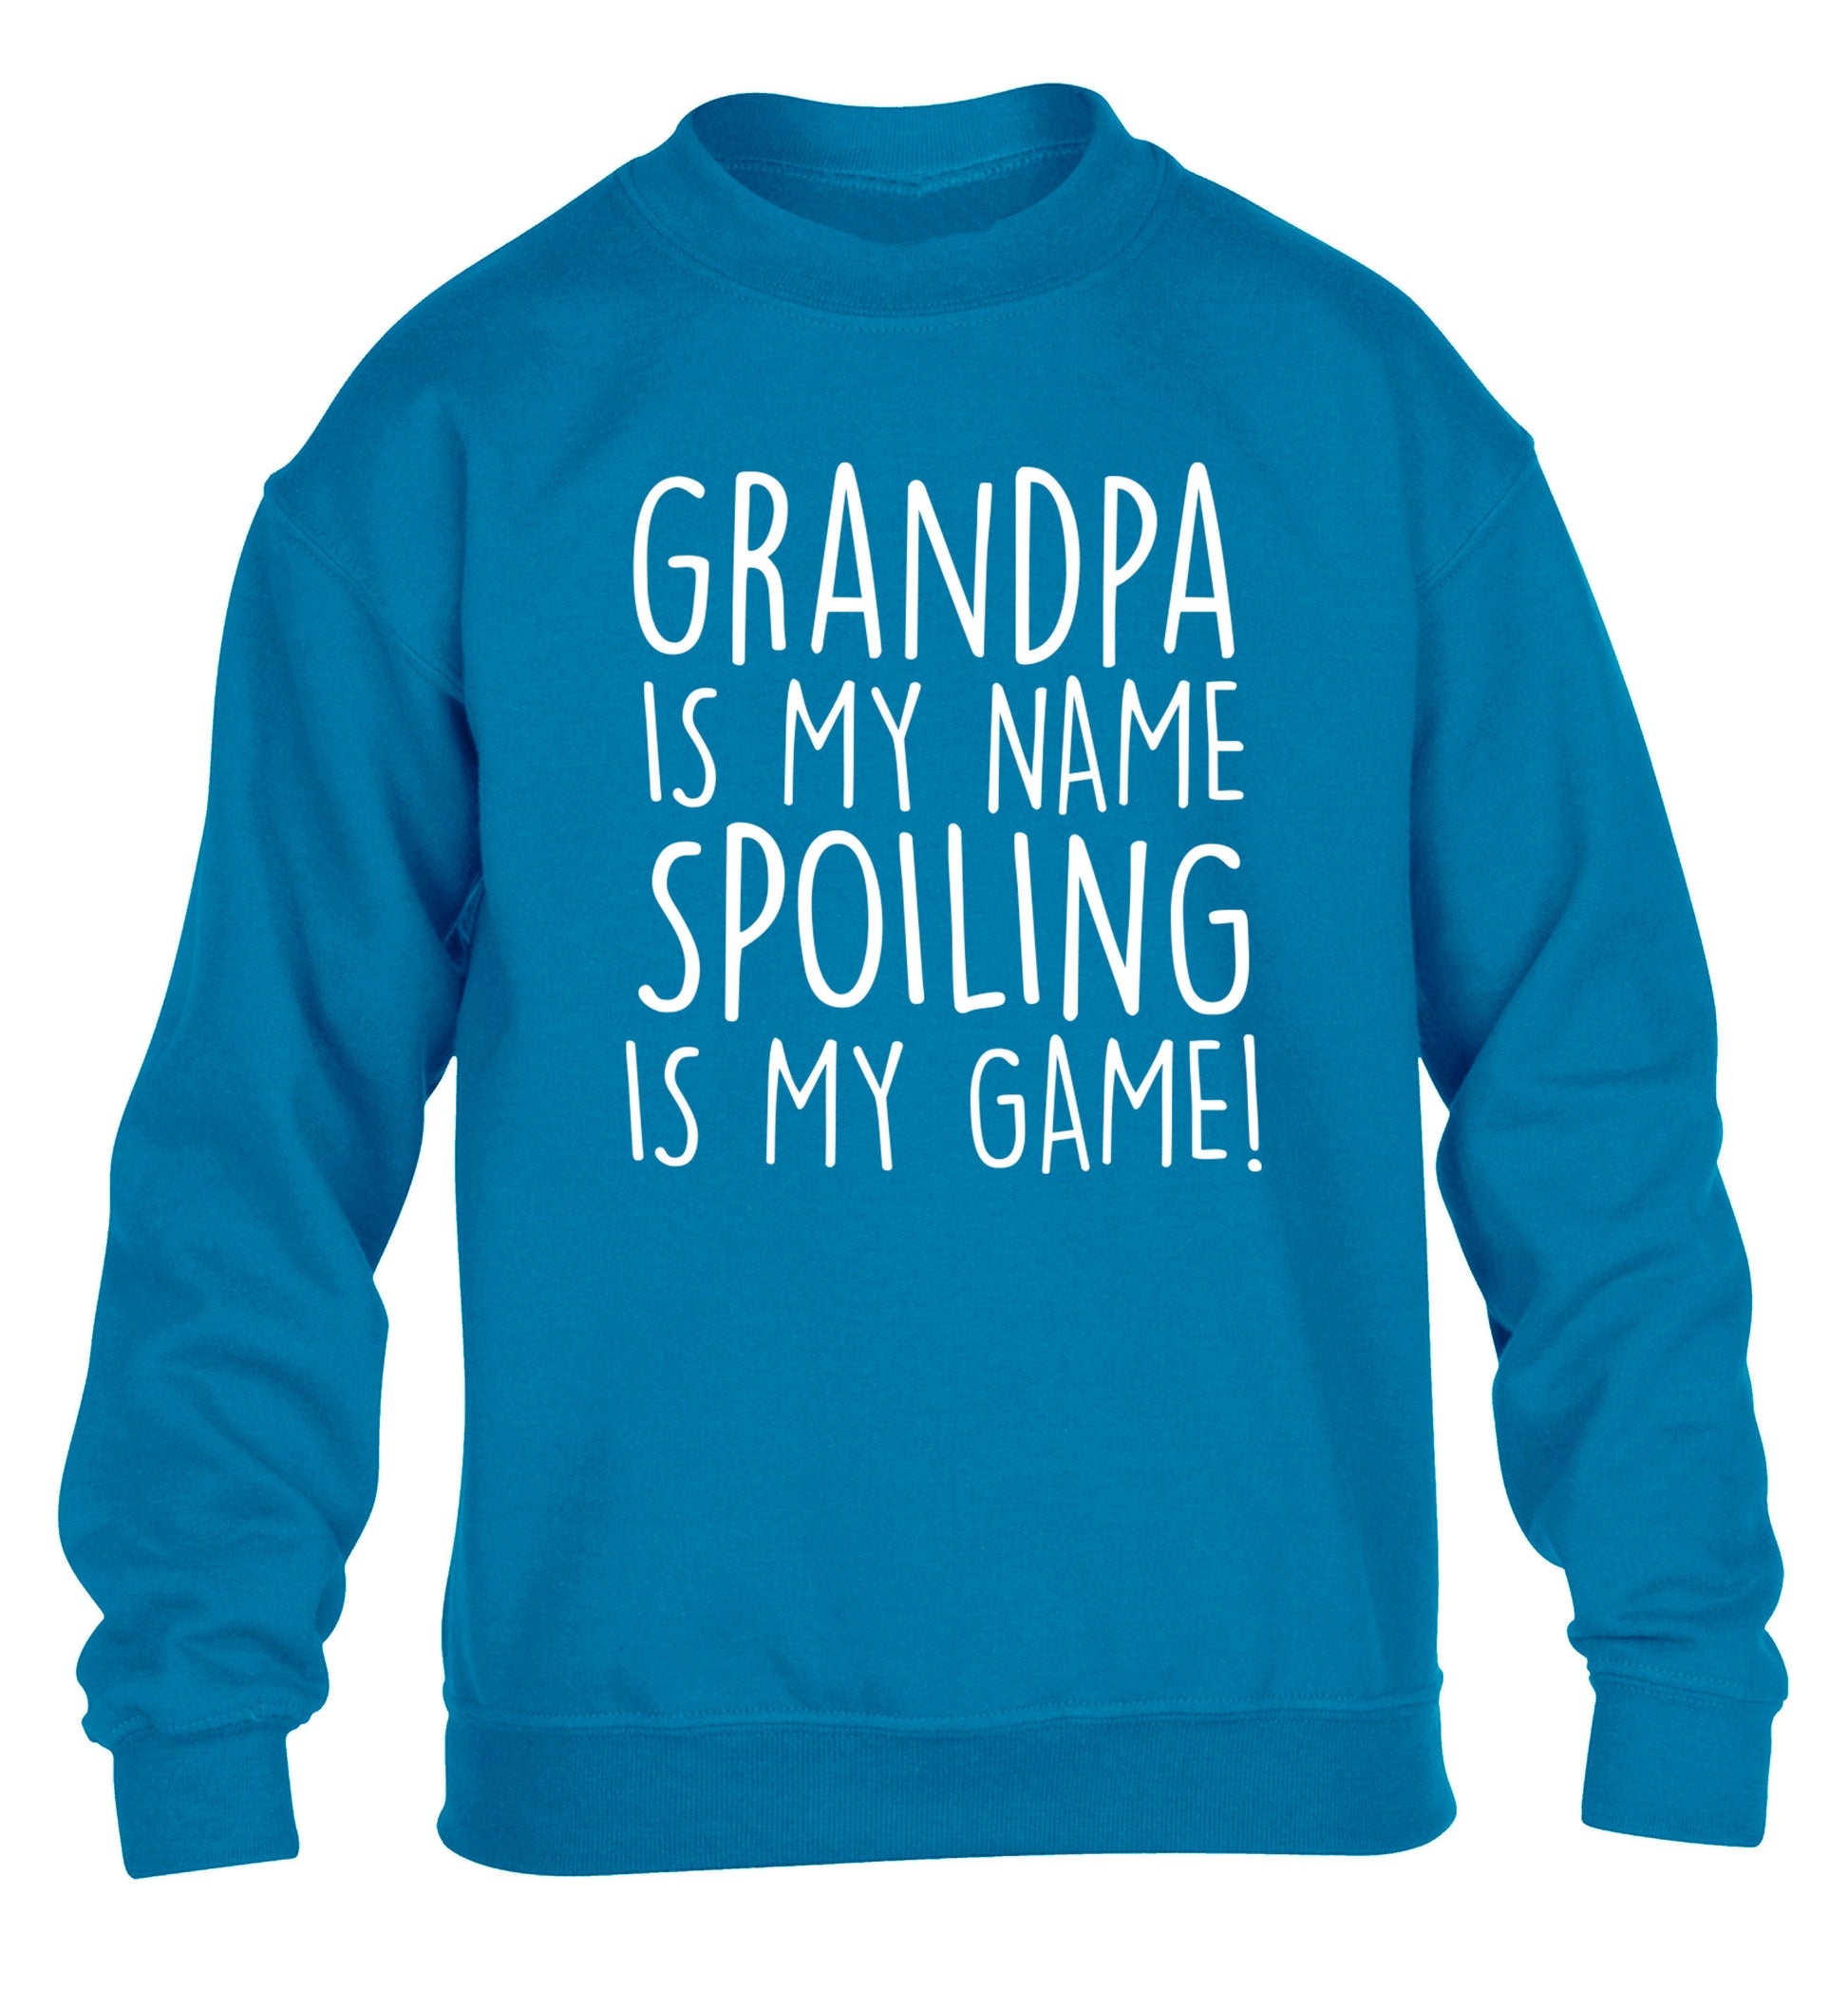 Grandpa is my name, spoiling is my game children's blue sweater 12-14 Years